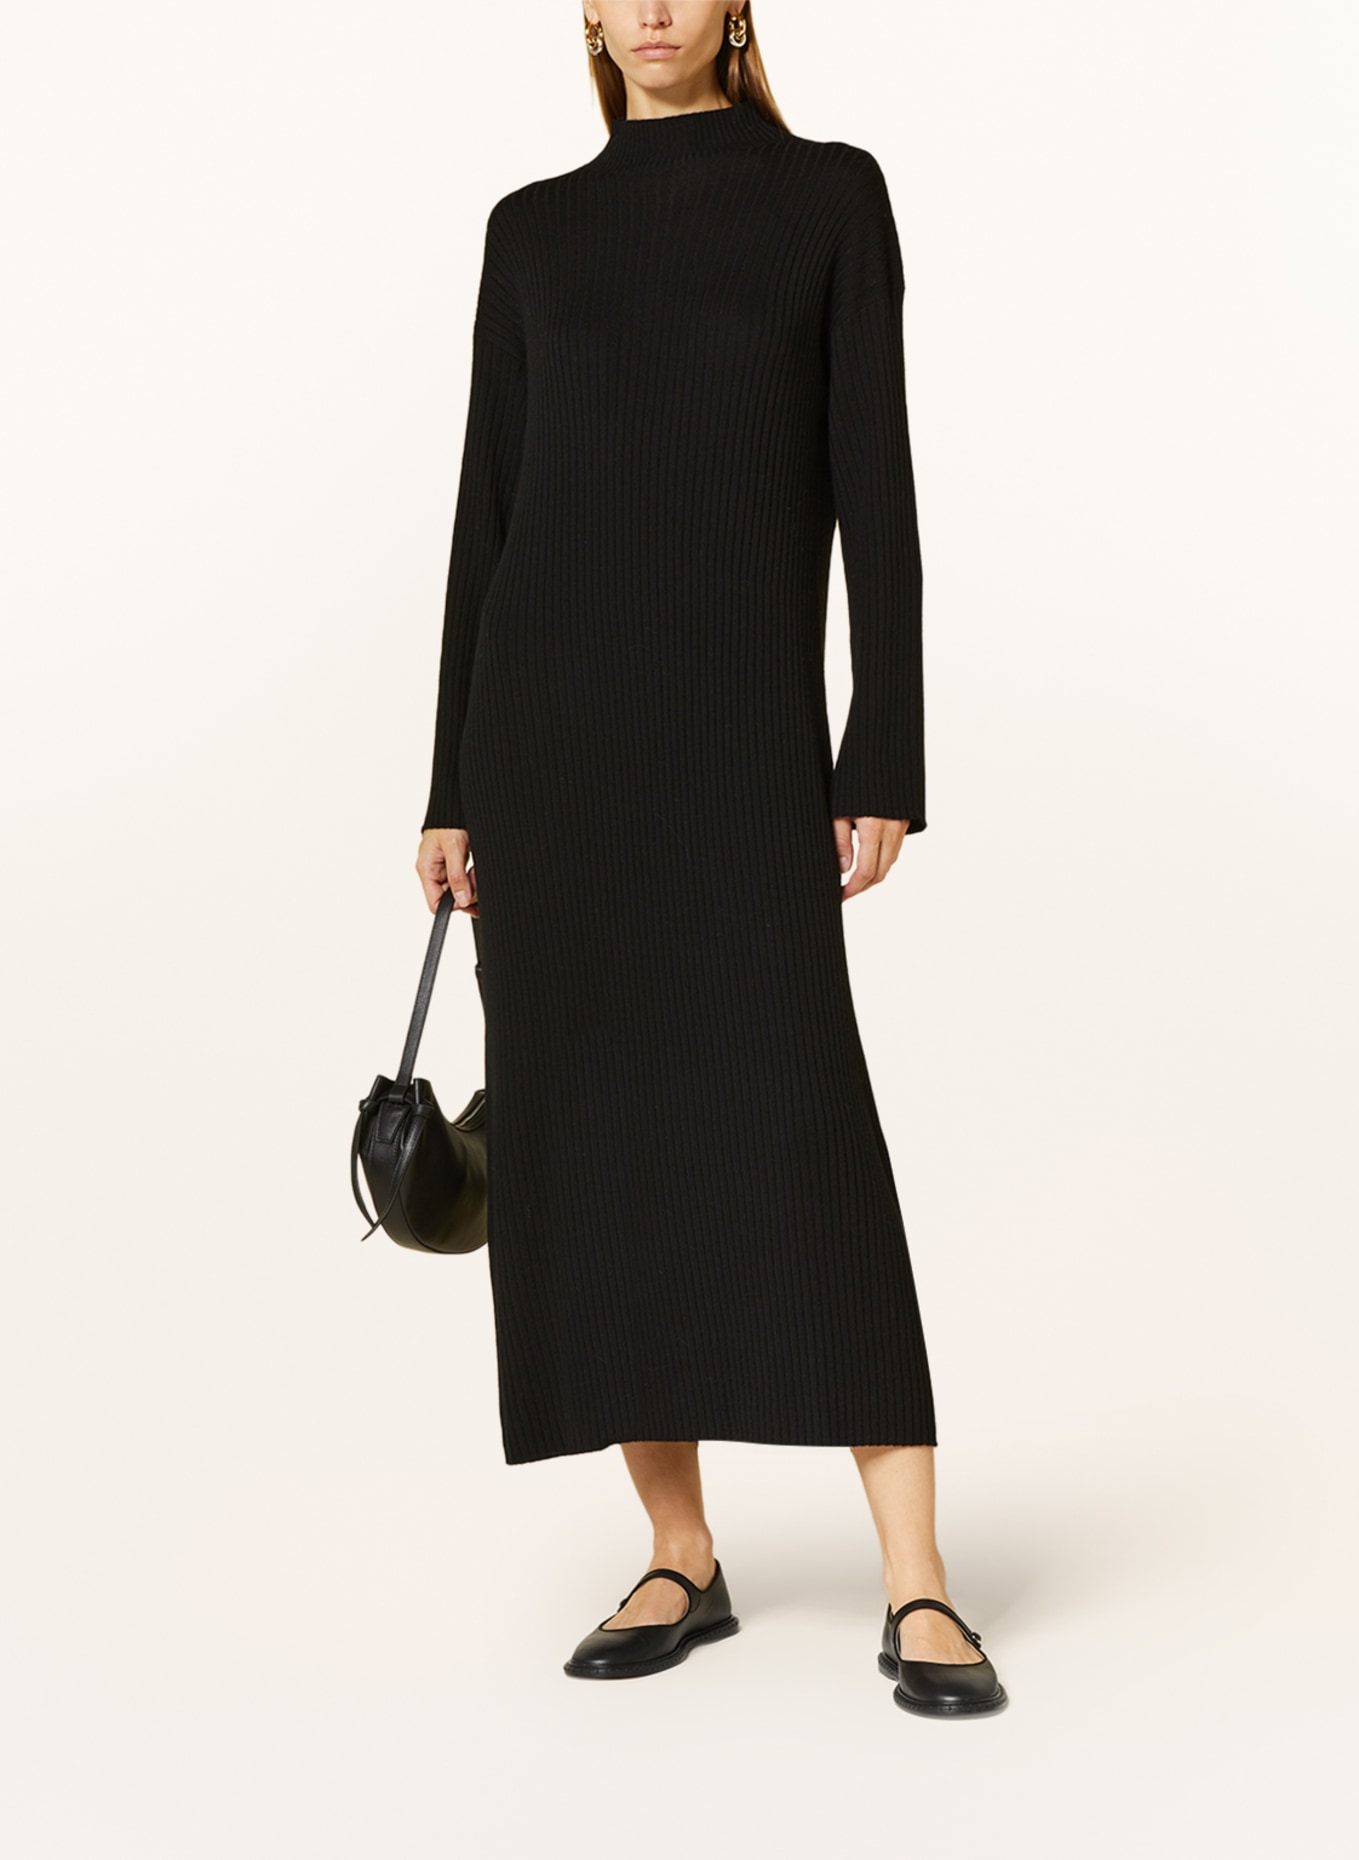 LOULOU STUDIO Knit dress ALTRA made of merino wool with cashmere, Color: BLACK (Image 2)